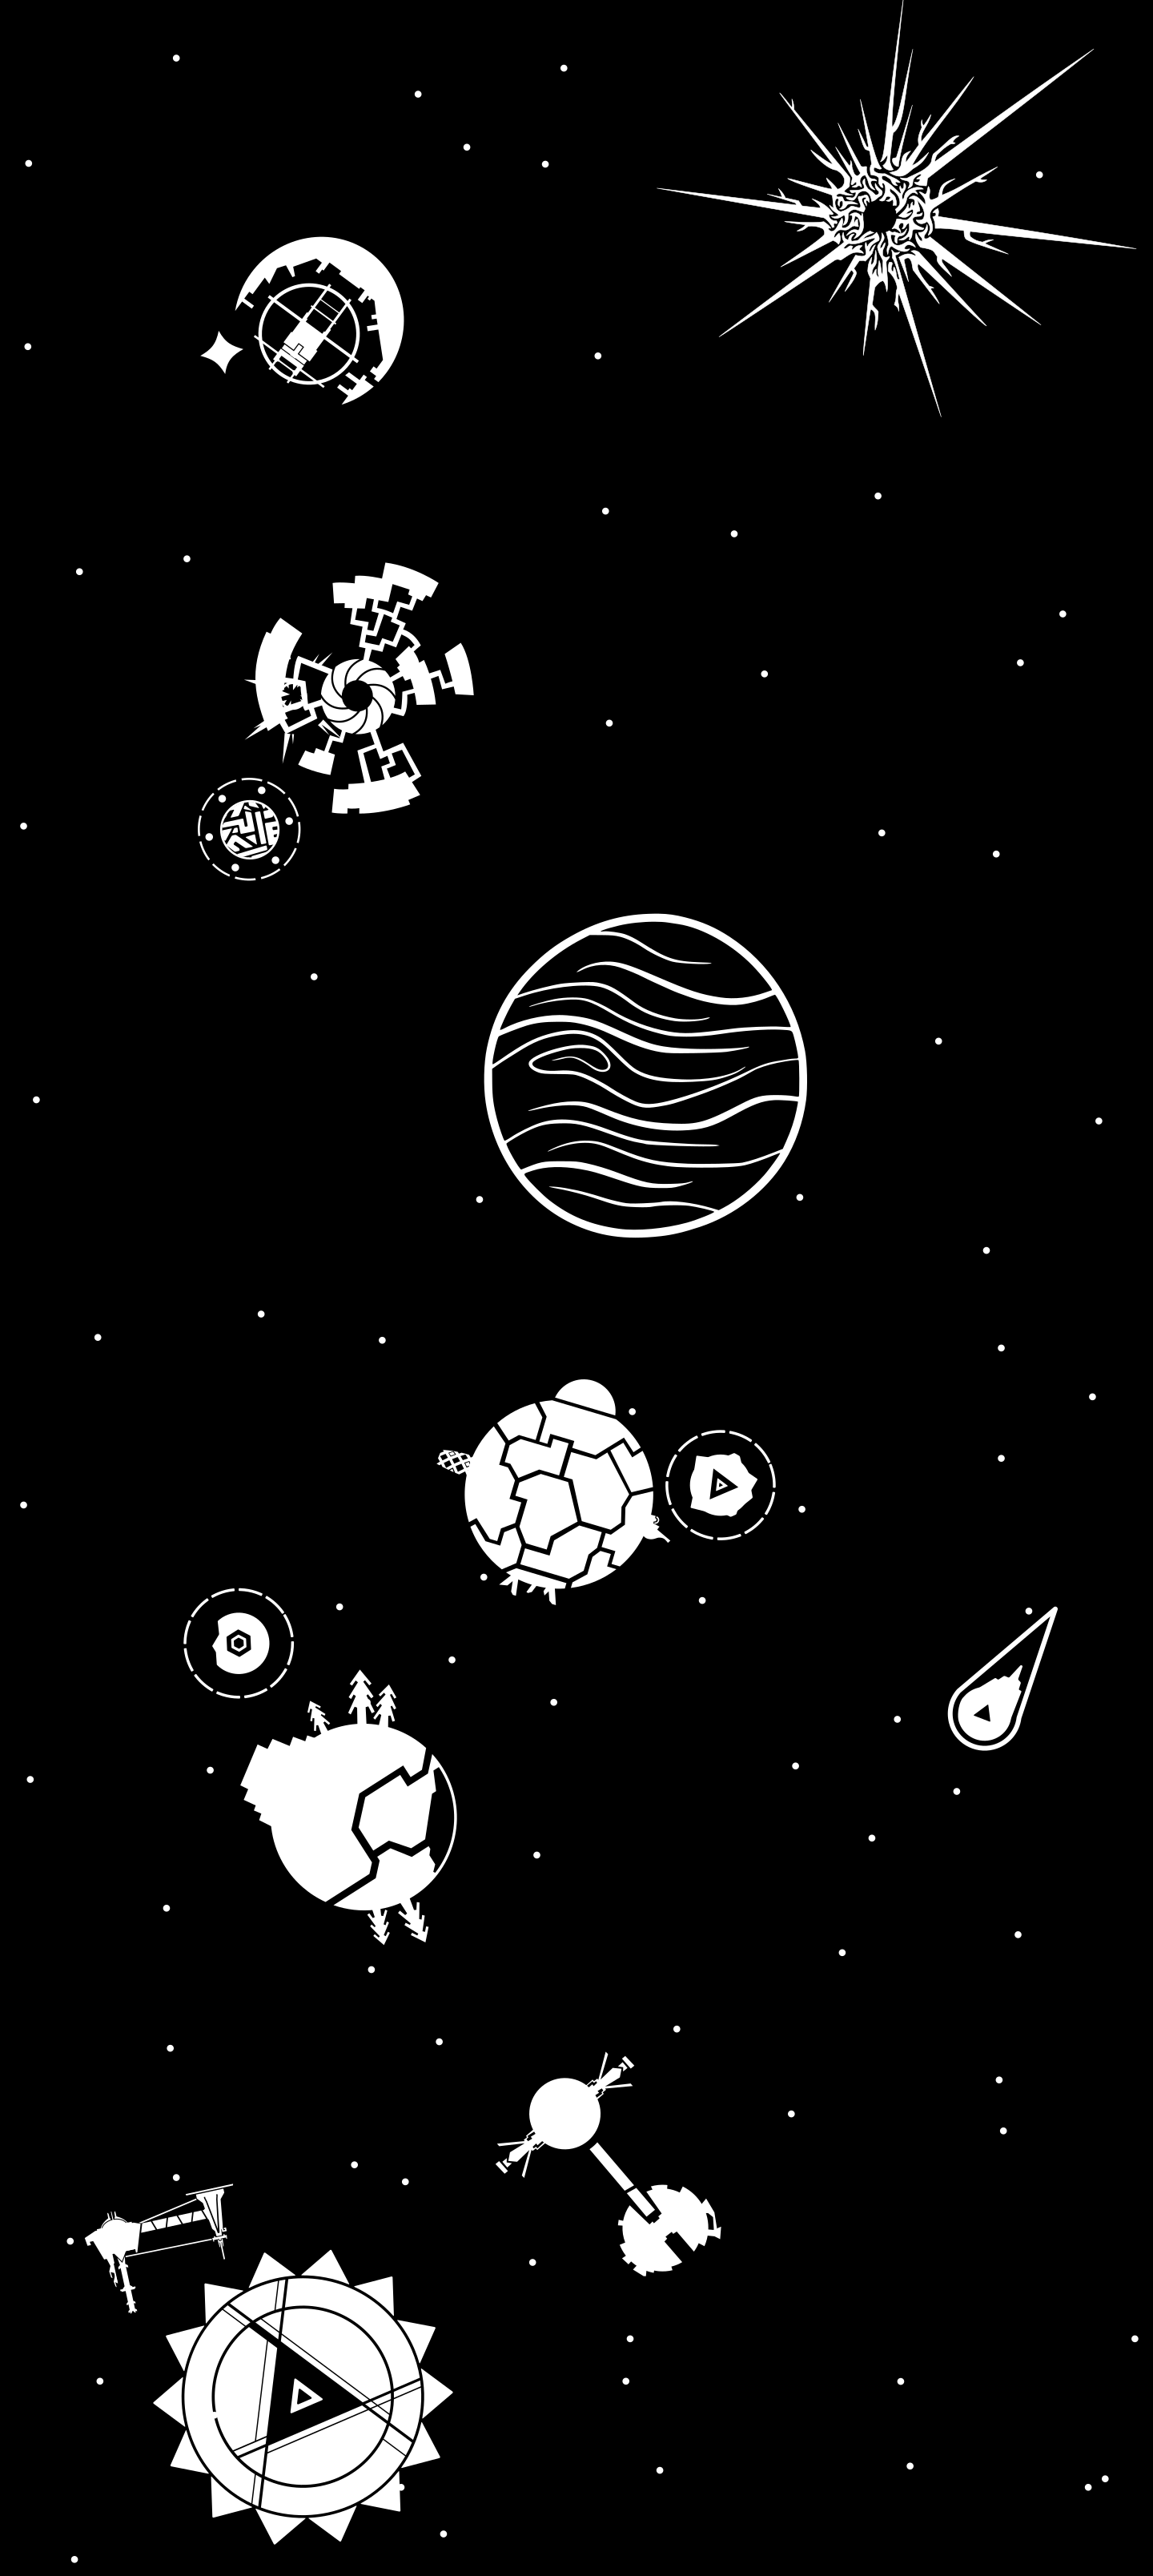 Made a few wallpaper using some planet icons I found on this subreddit